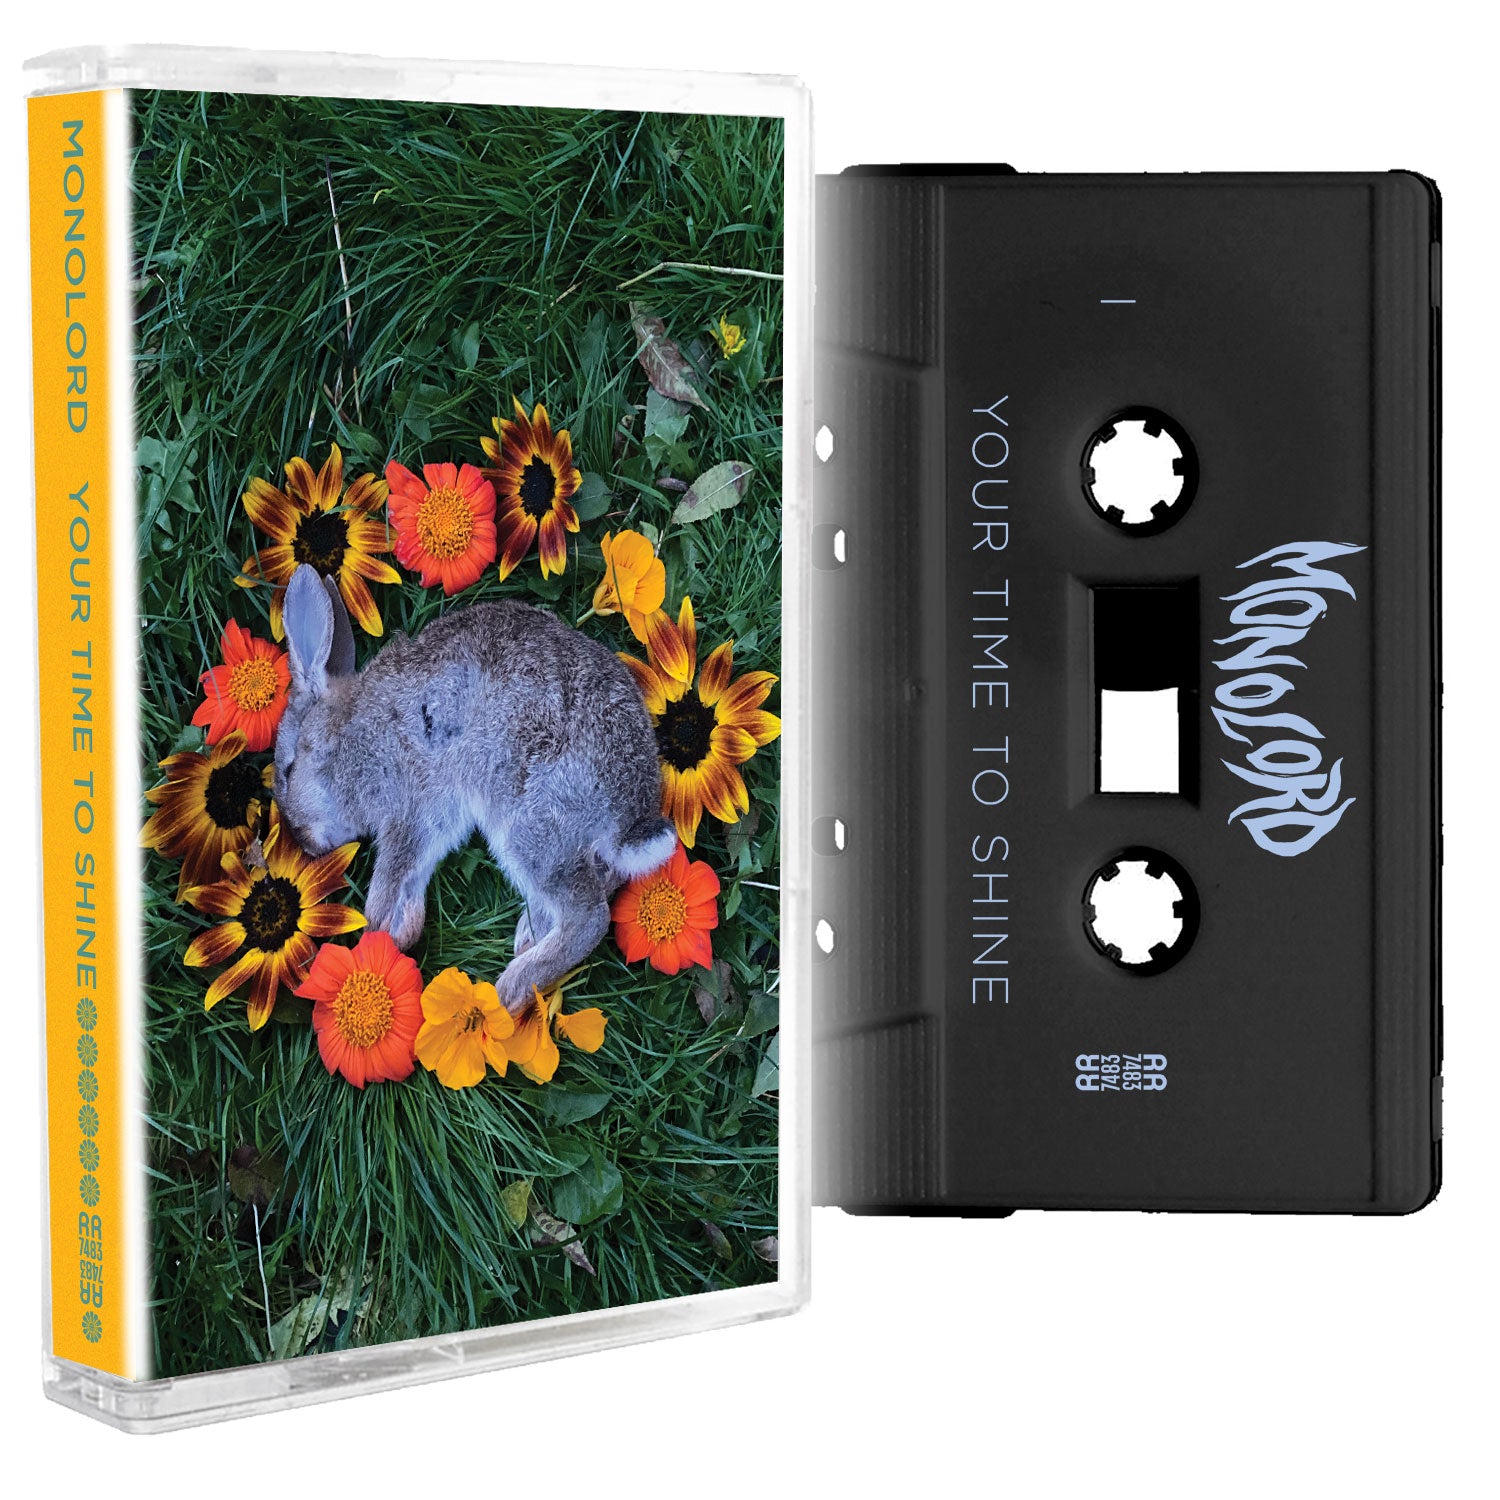 Monolord "Your Time To Shine" Cassette